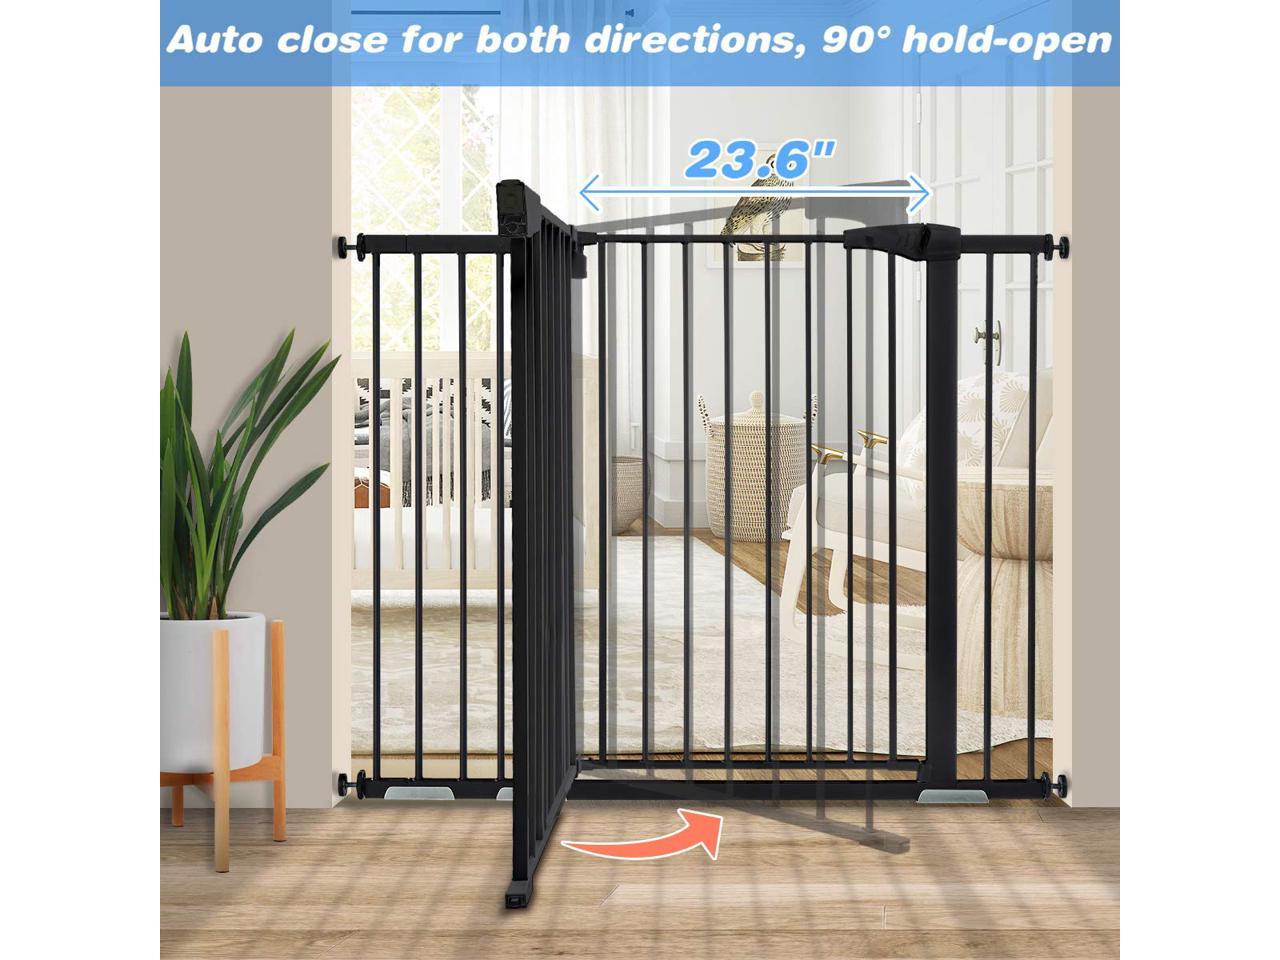 5.5 & 8.25 Extension 2.75 Include 4 Pressure Bolts Black KingSo 48.8 W x 36 H Baby Gate Extra Tall Wide Large Dog Gate Auto Close Safety Gate Durable Walk Thru Child Gate for Stairs Doorways 